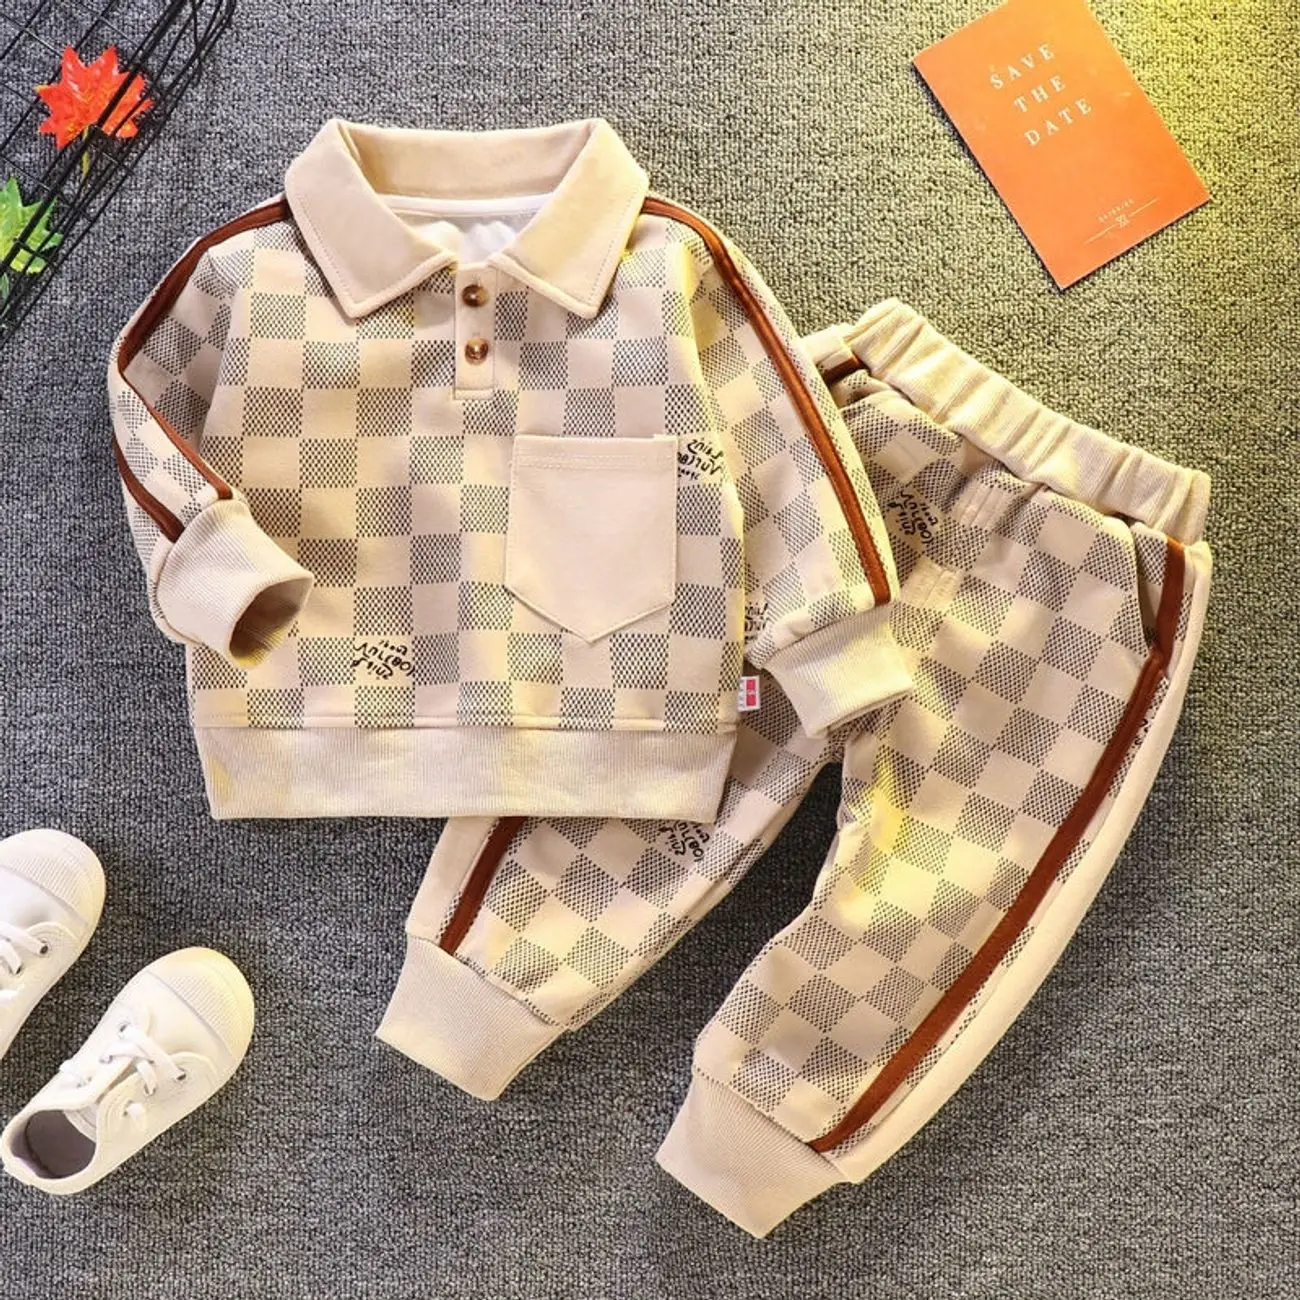 Boys' Autumn Suit Foreigner 2023 New Handsome Children's Baby Sweater Pants 2-Piece Toddler Clothing Set 9M 12M 2T 4T 5T 6T